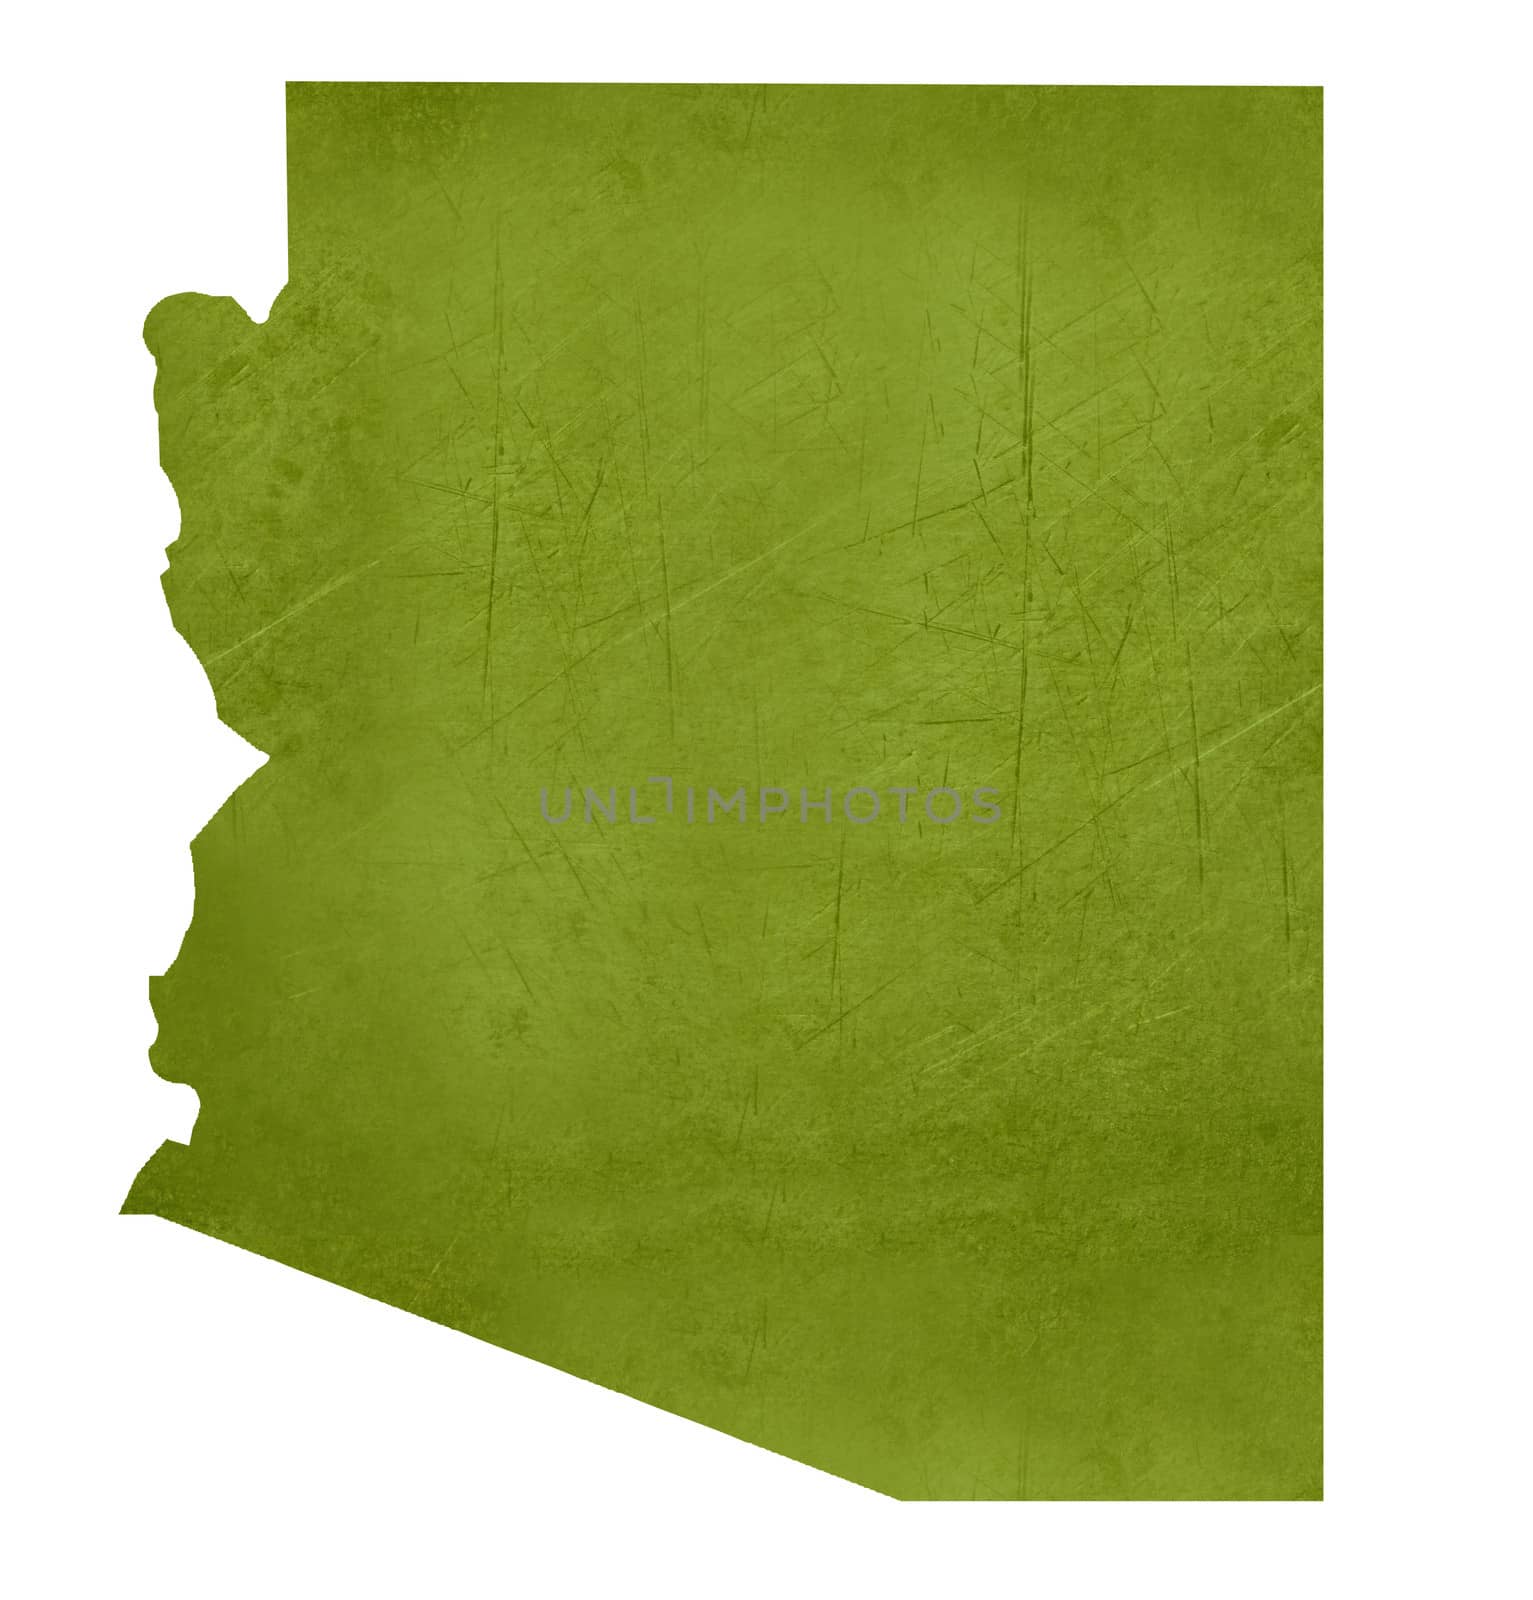 American state of Arizona isolated on white background with clipping path.